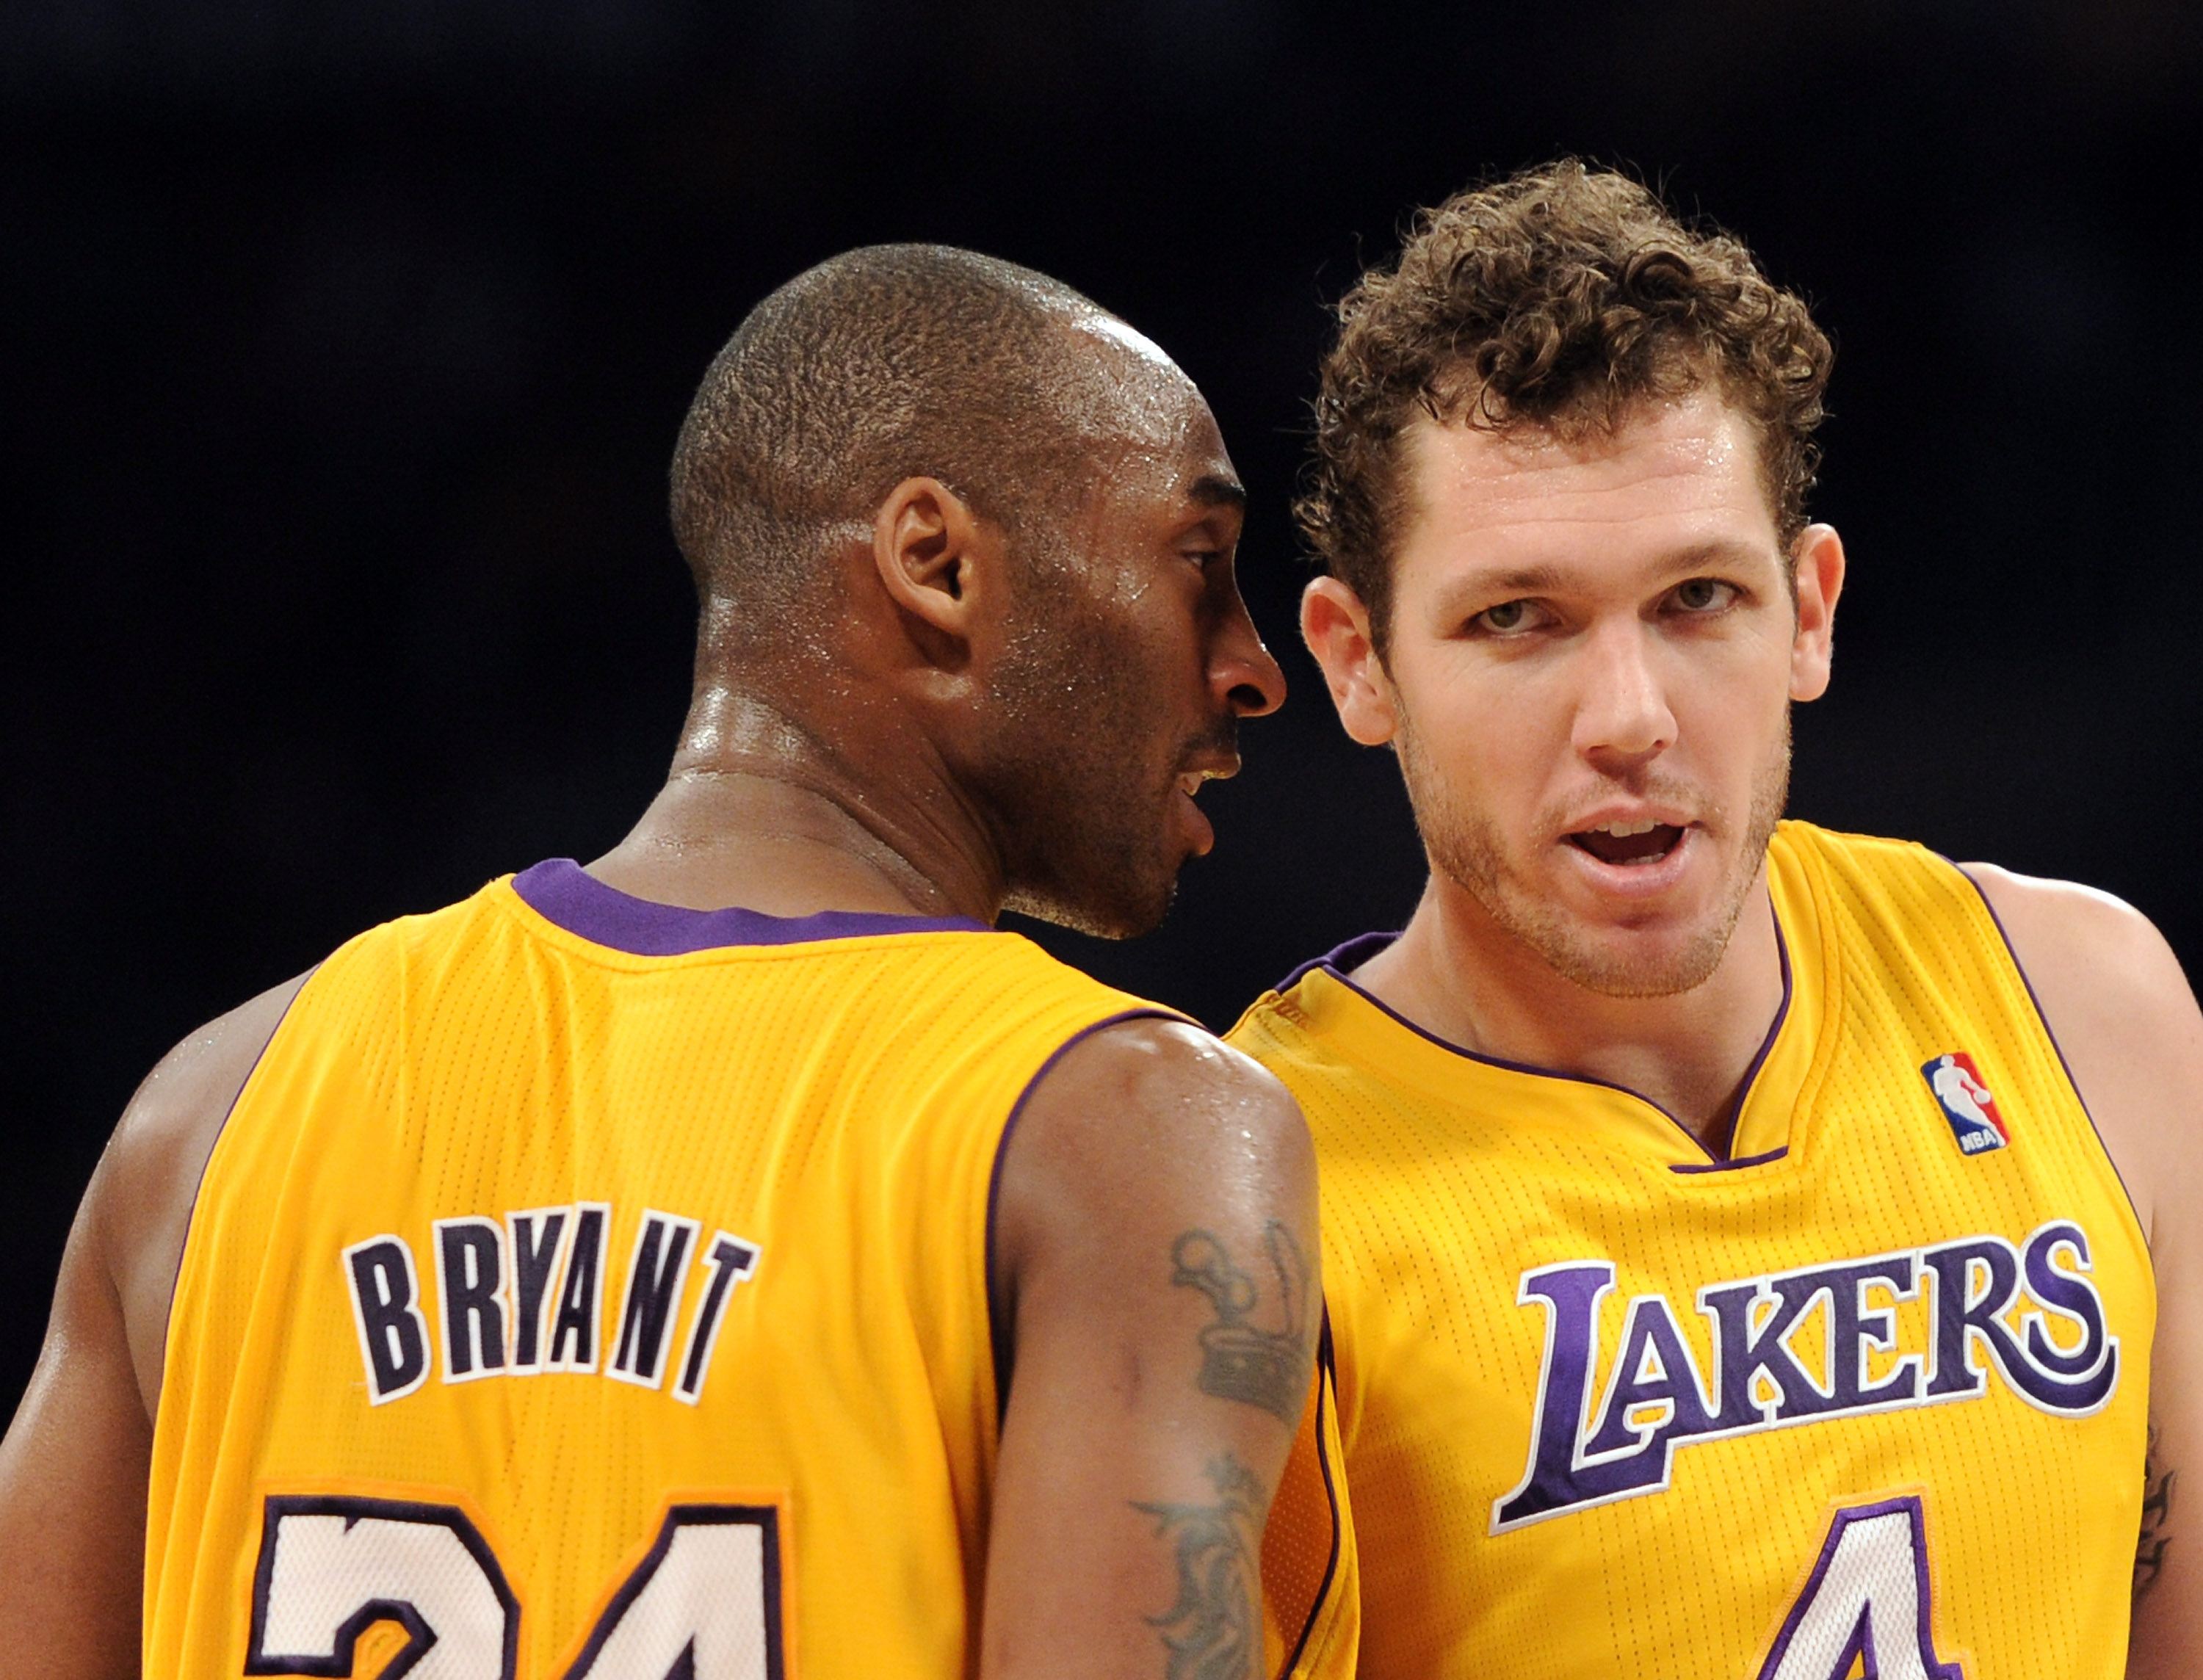 LOS ANGELES, CA - JANUARY 04:  Kobe Bryant #24 of the Los Angeles Lakers and Luke Walton #4 talk during the game against the Detroit Pistons at the Staples Center on January 4, 2011 in Los Angeles, California. NOTE TO USER: User expressly acknowledges and